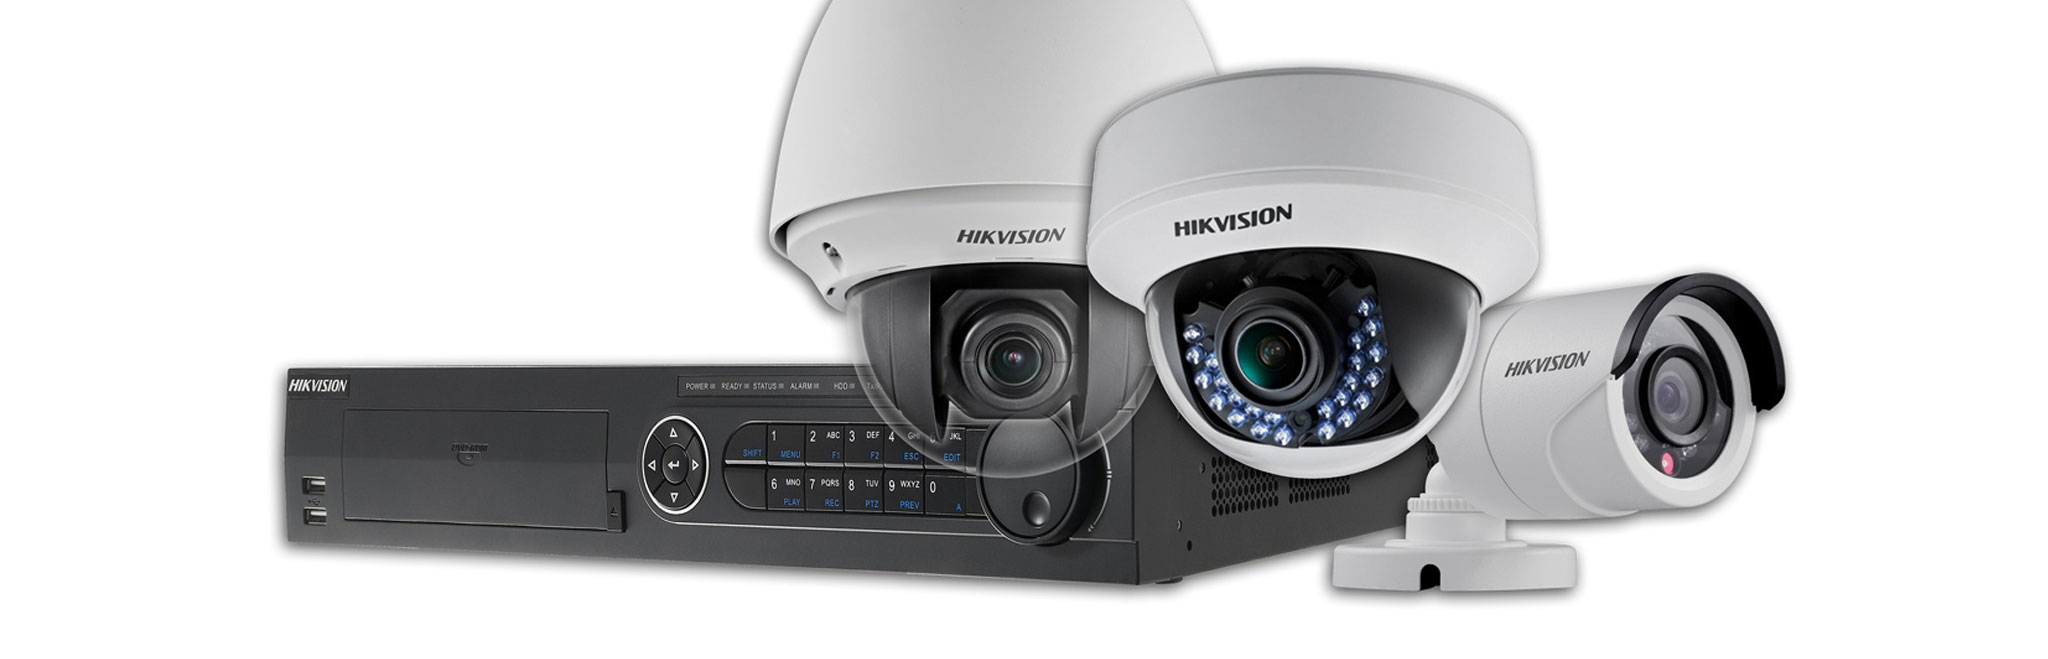 hikvision cctv suppliers in fbd